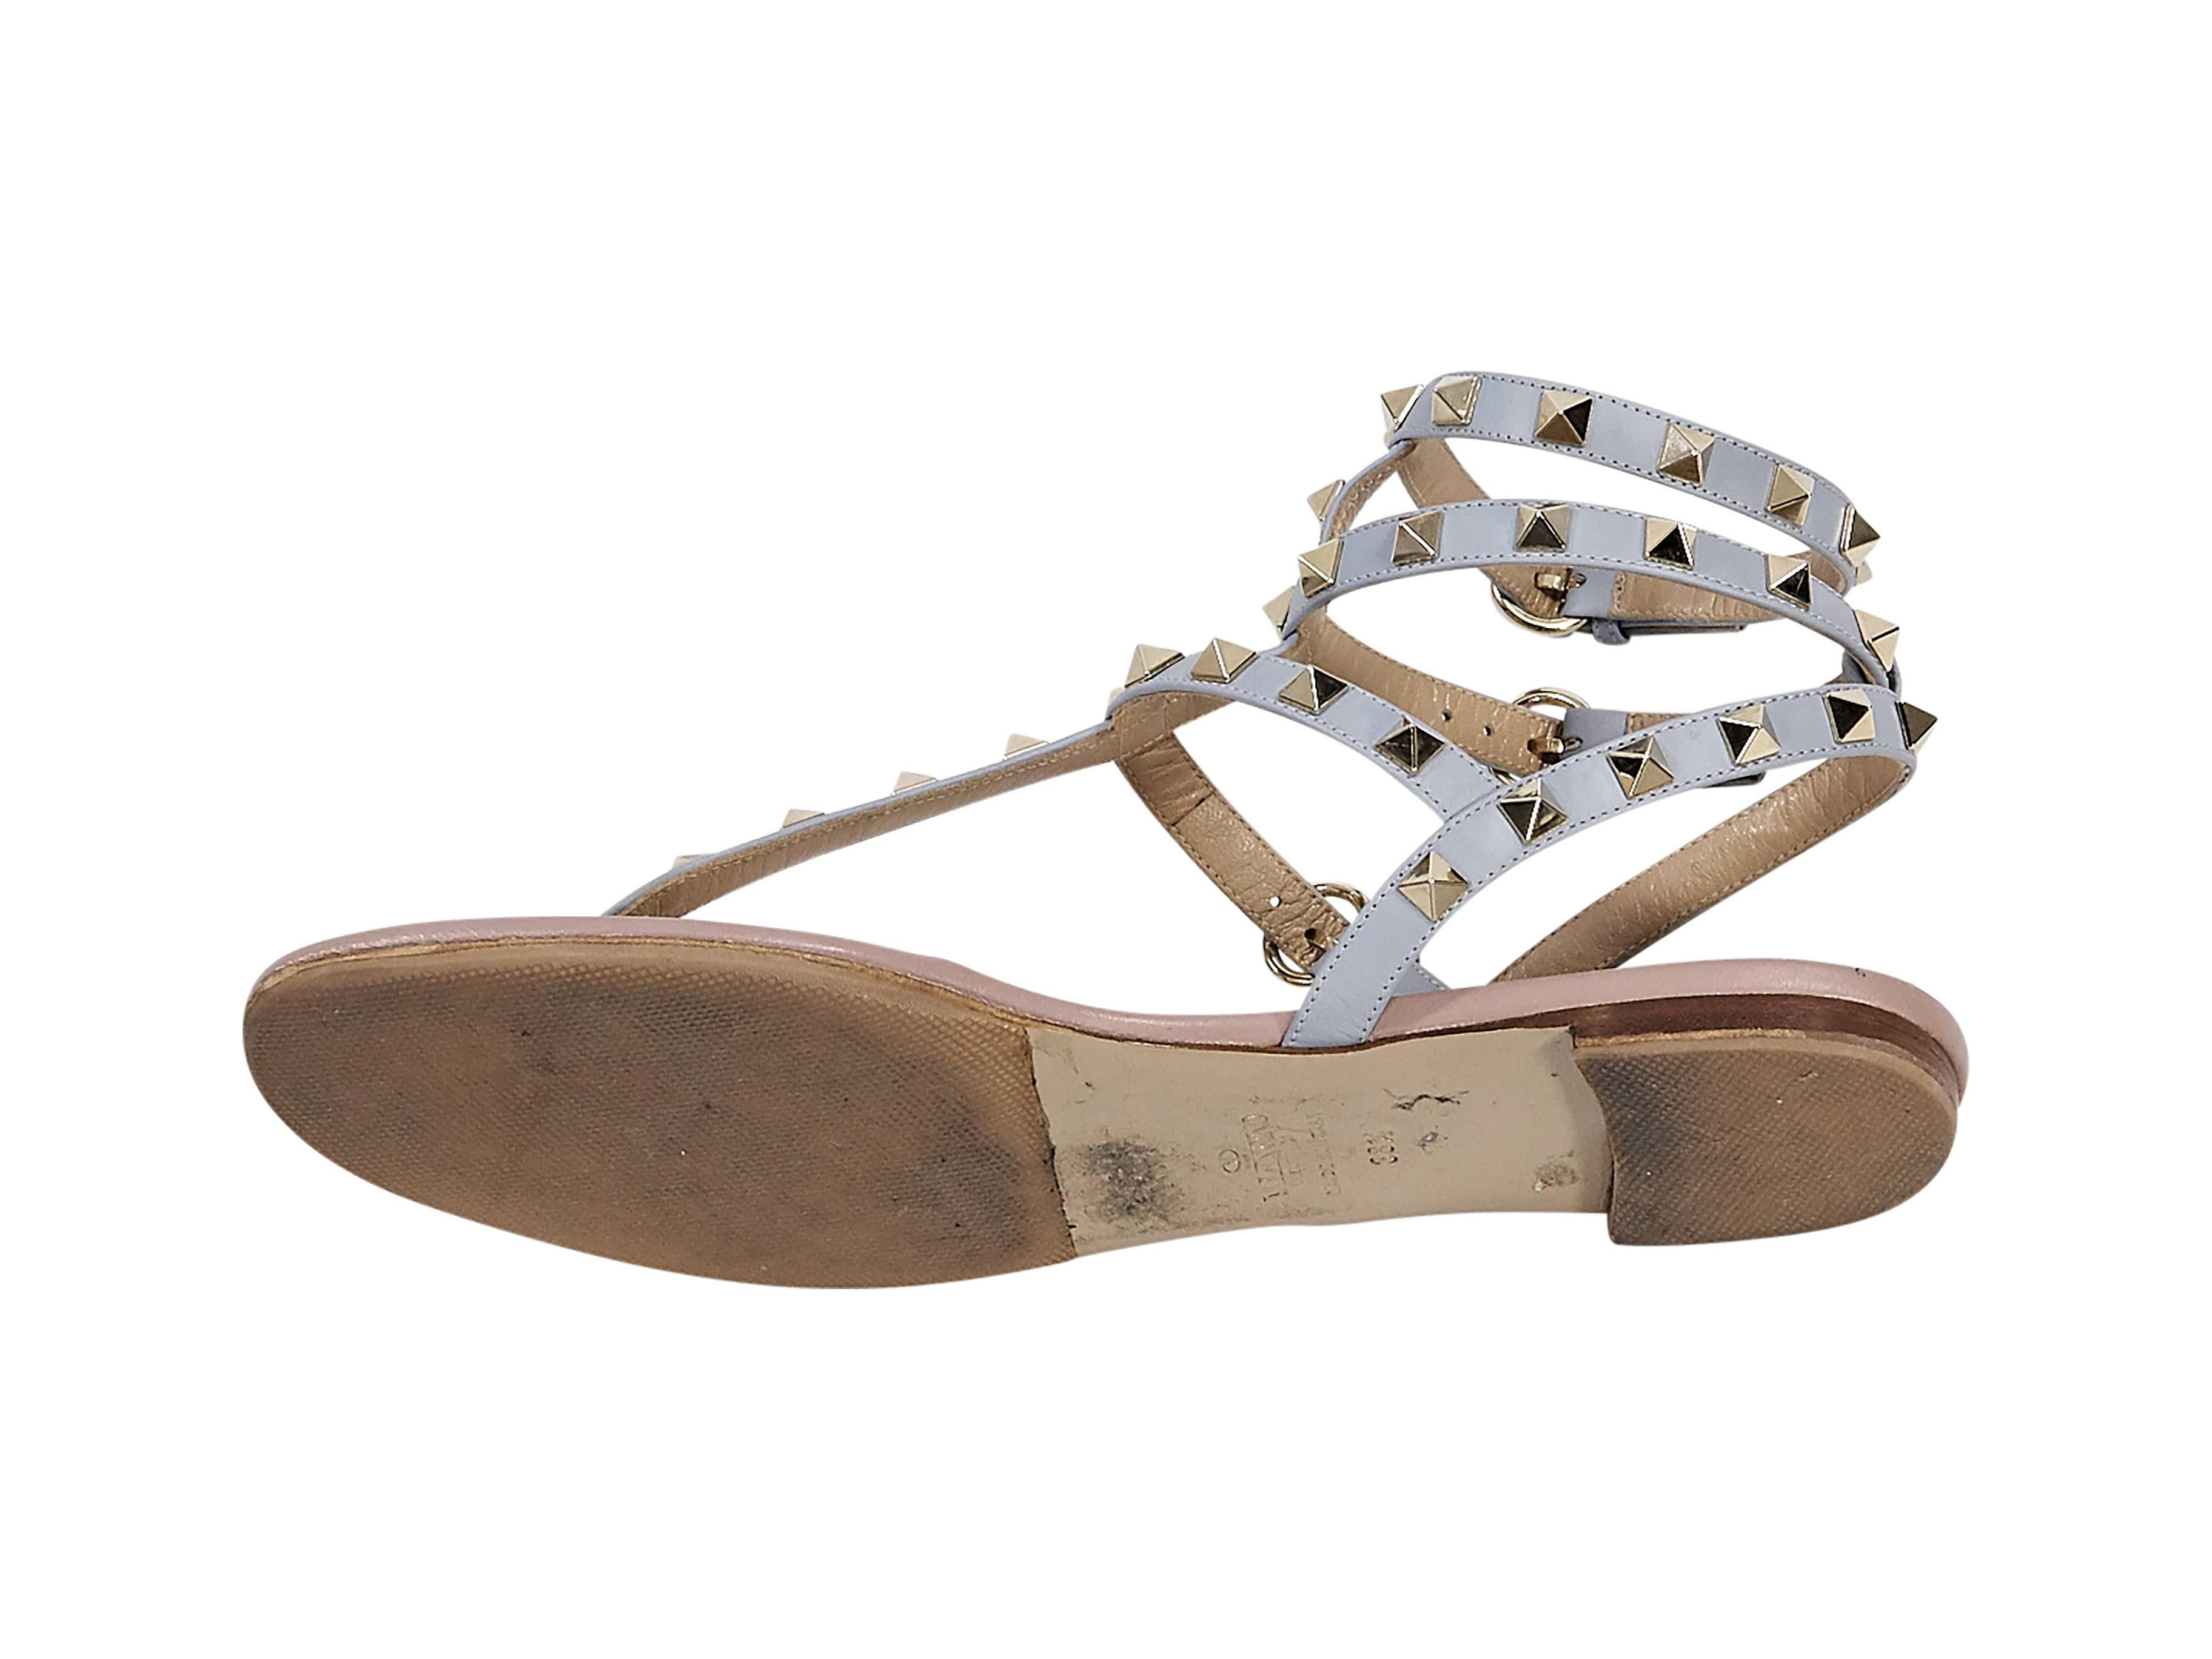 Product details:  Pale blue leather Rockstud sandals by Valentino.  Accented with signature pyramid studs.  Adjustable ankle straps.  T-strap design.  Goldtone hardware. 
Condition: Pre-owned. Very good.

Est. Retail $ 945.00